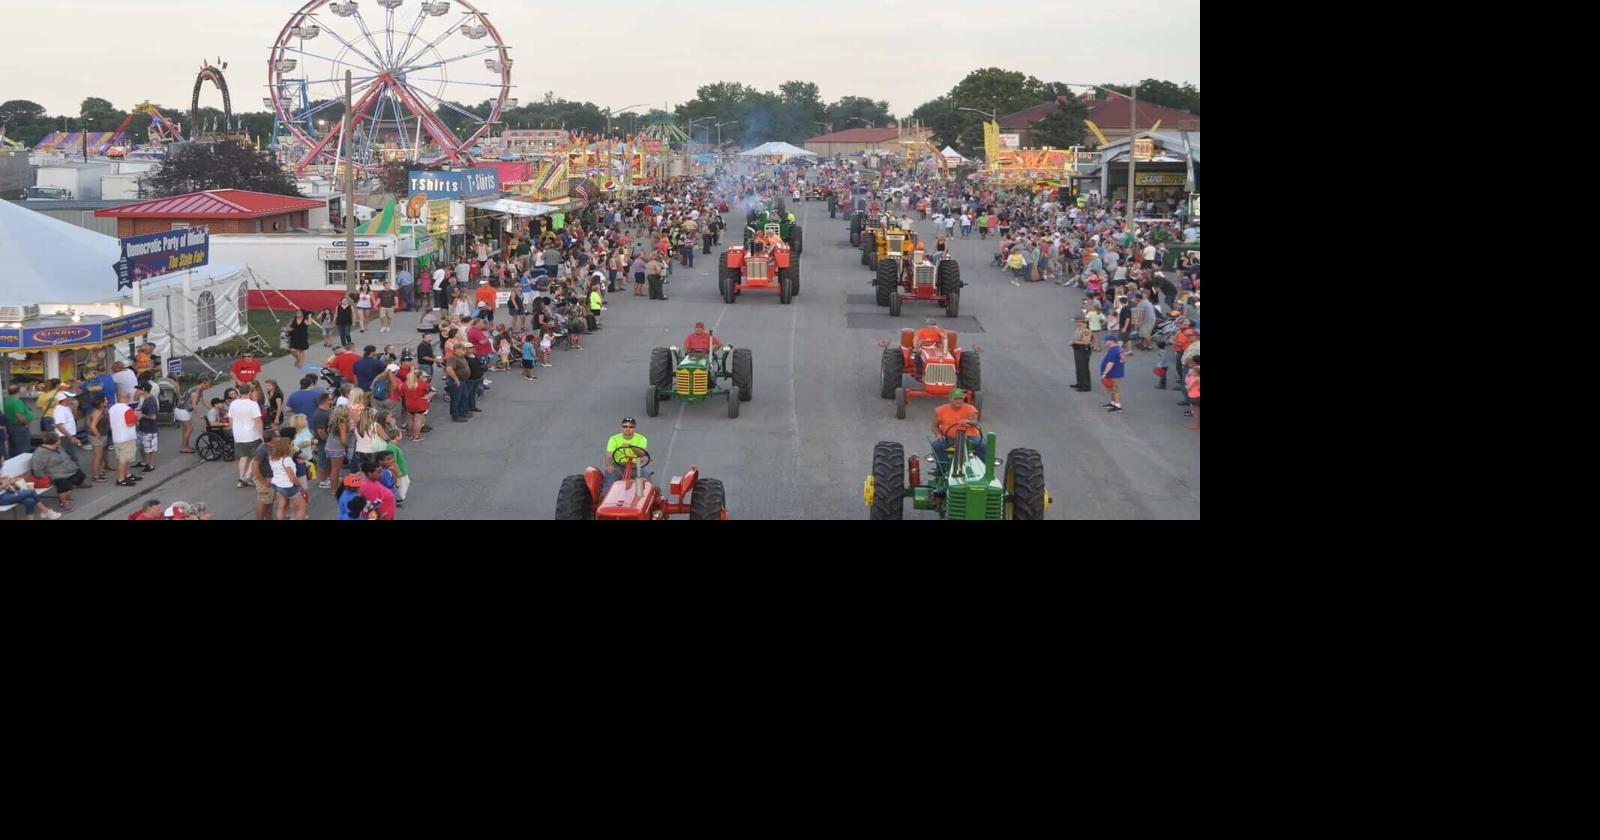 2022 Illinois State Fair attendance sets alltime record Top Stories